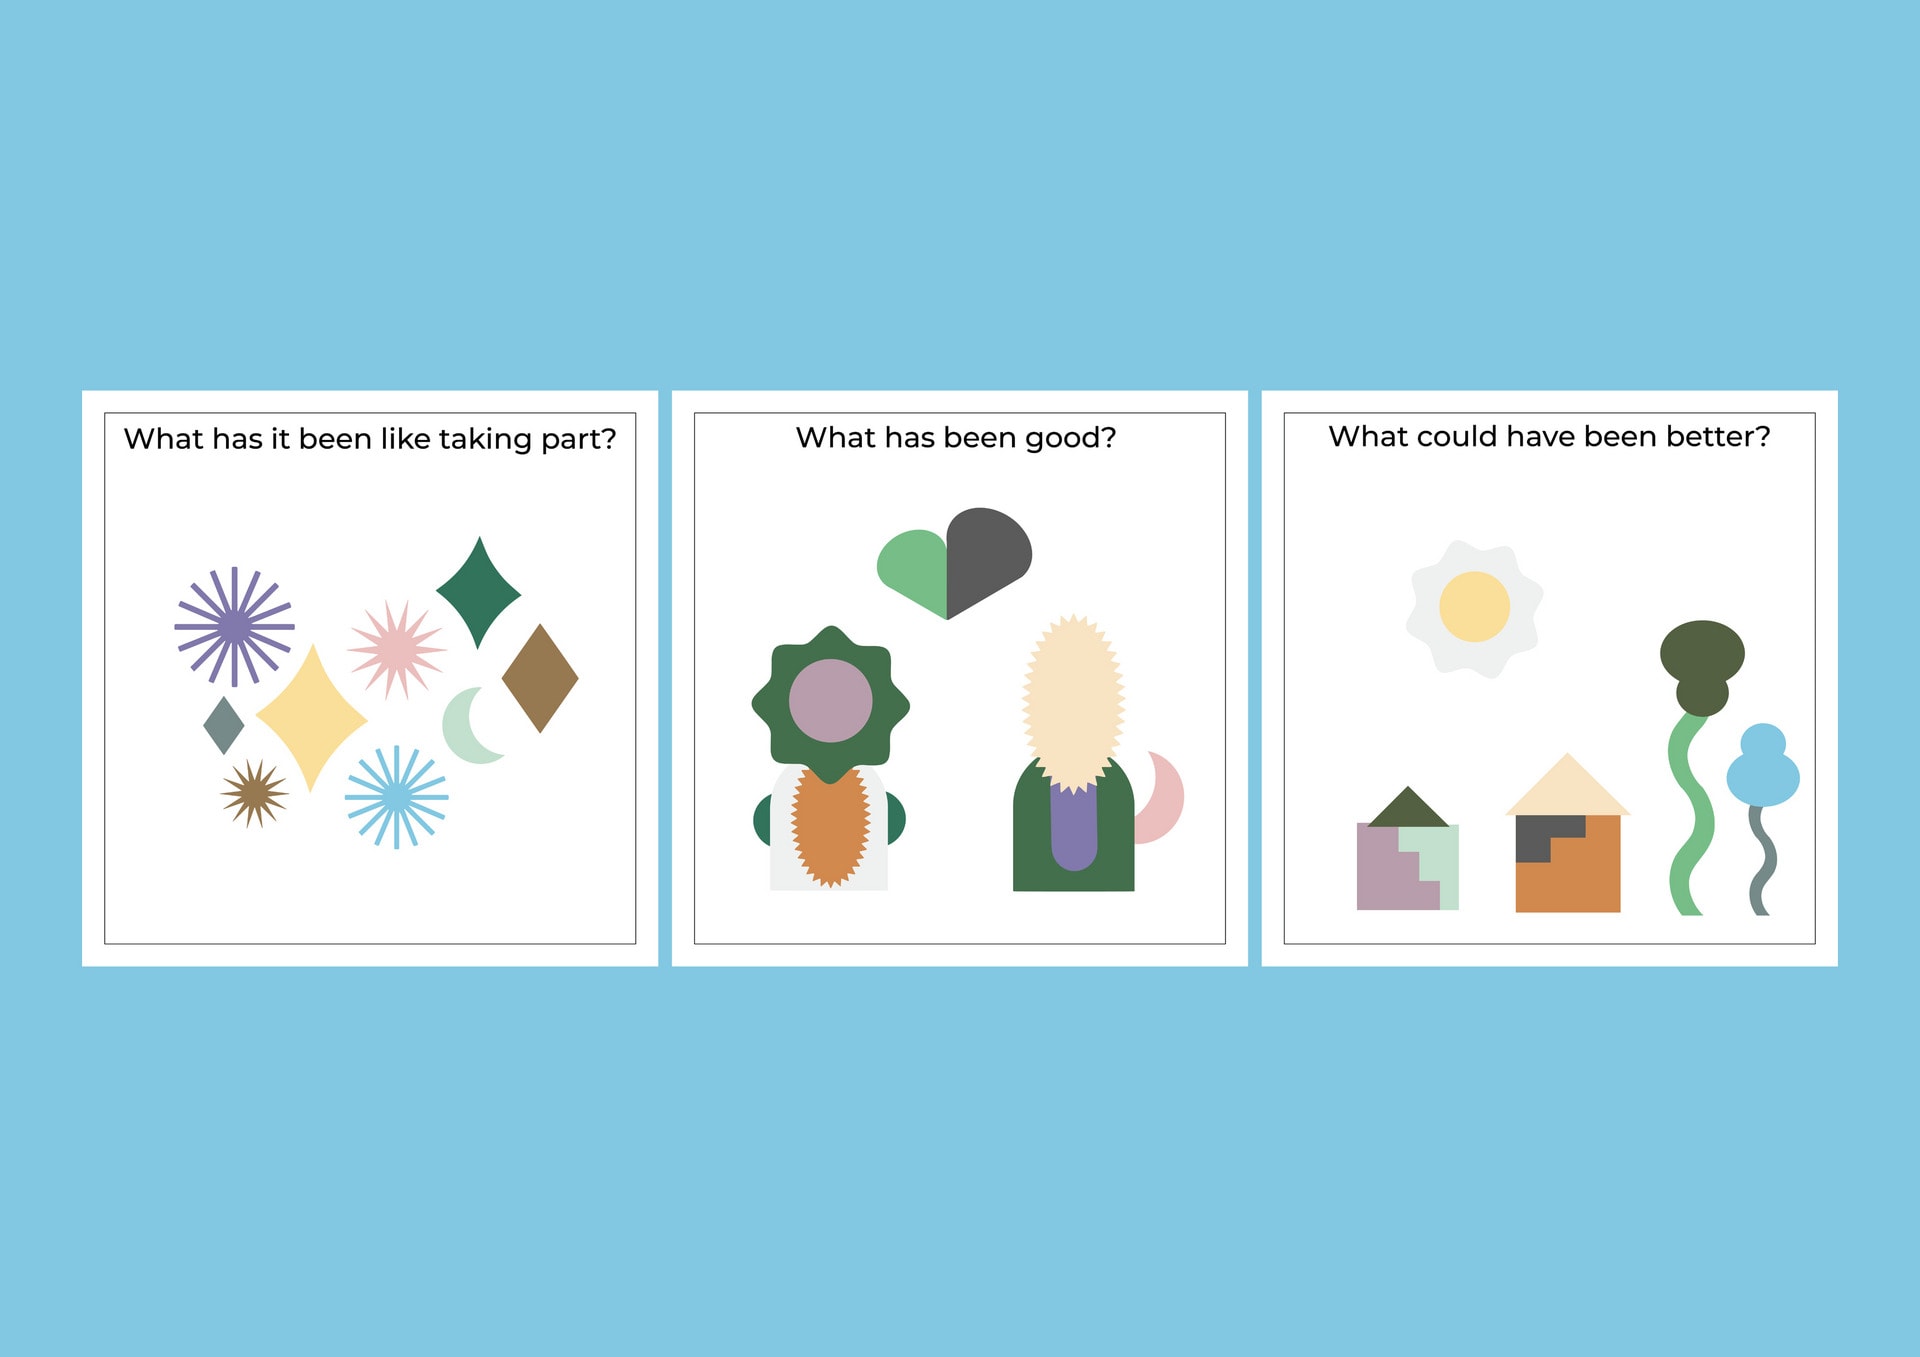 An example image showing how the question sheets can be answered using the shape stickers.